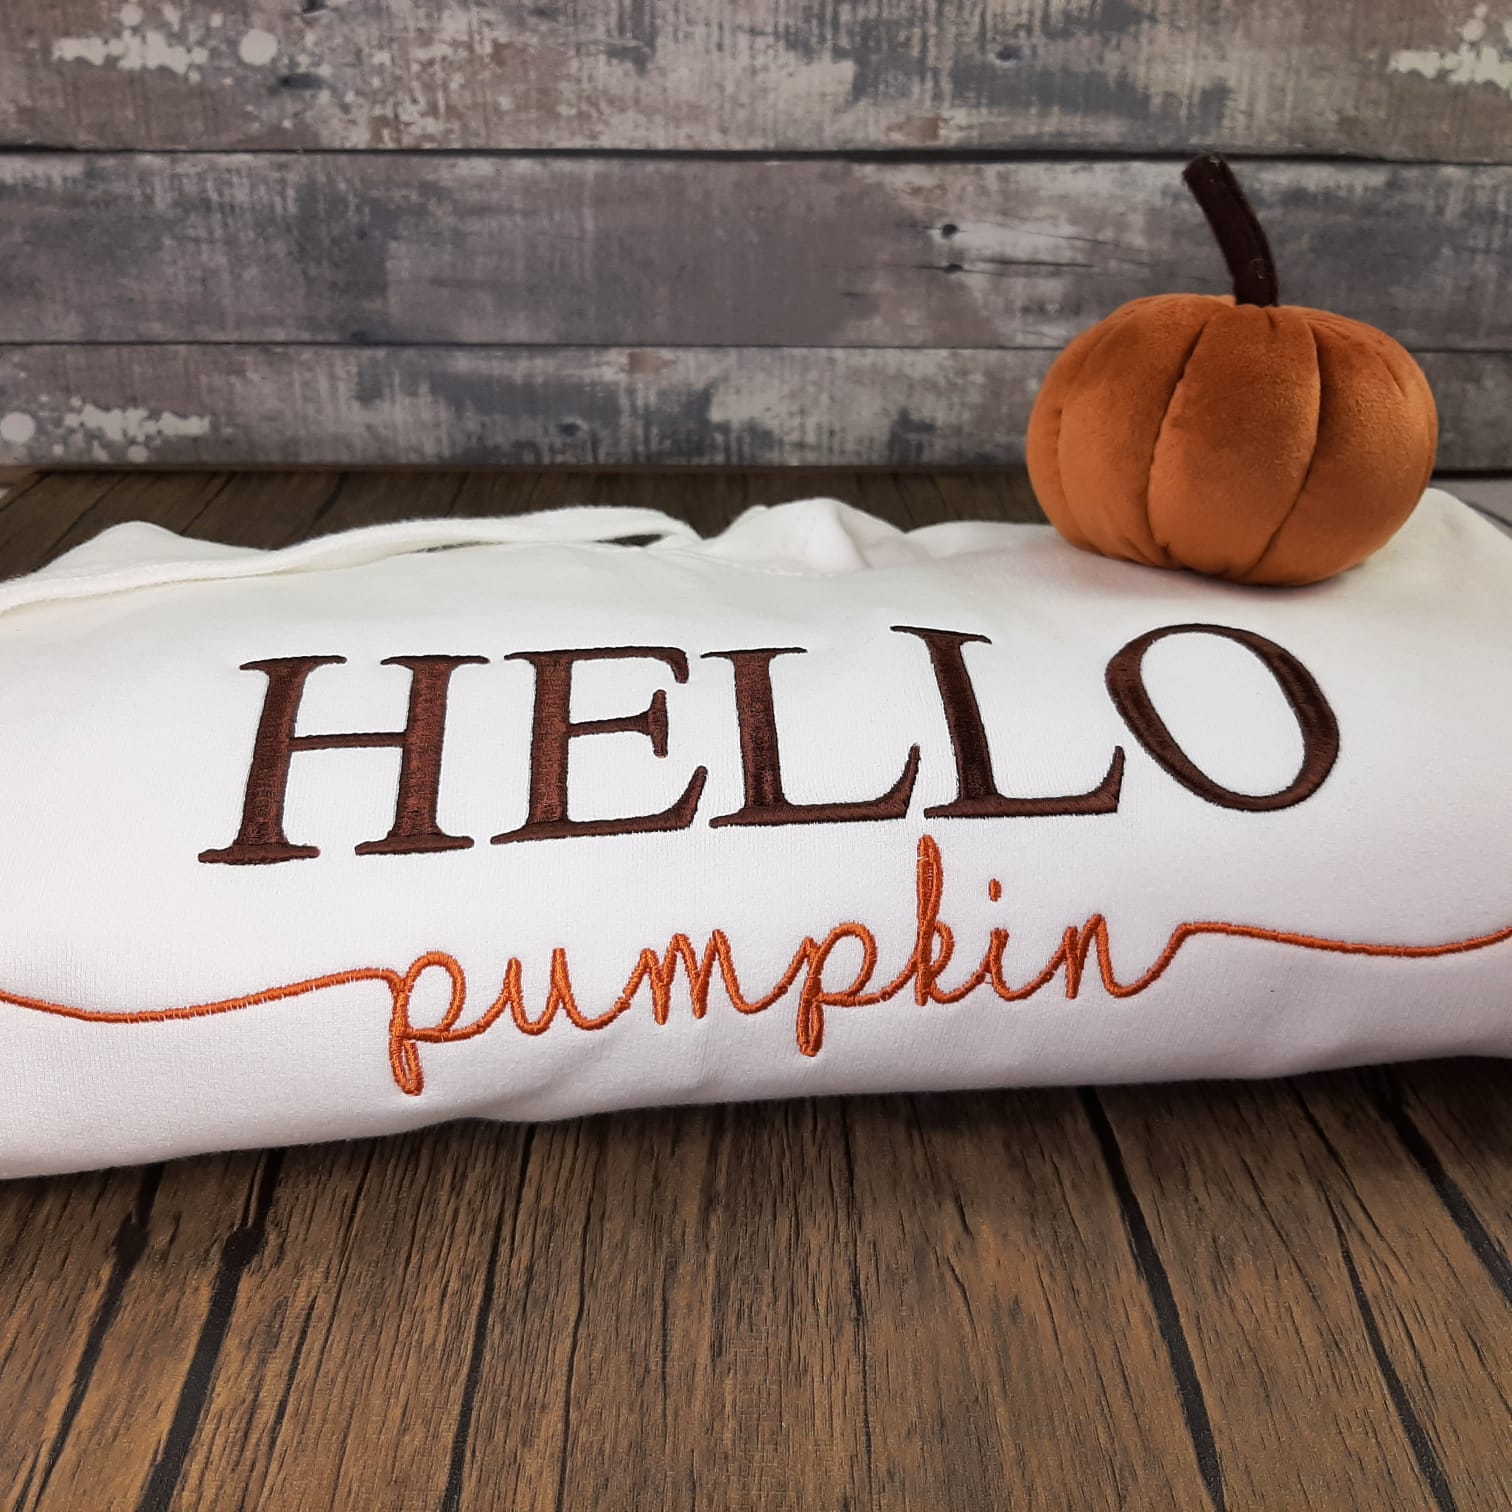 Hello Pumpkin Hoodie/Sweater hello pumpkin halloween embroidered sweater jumper or hoodie for adults or childrens folded white